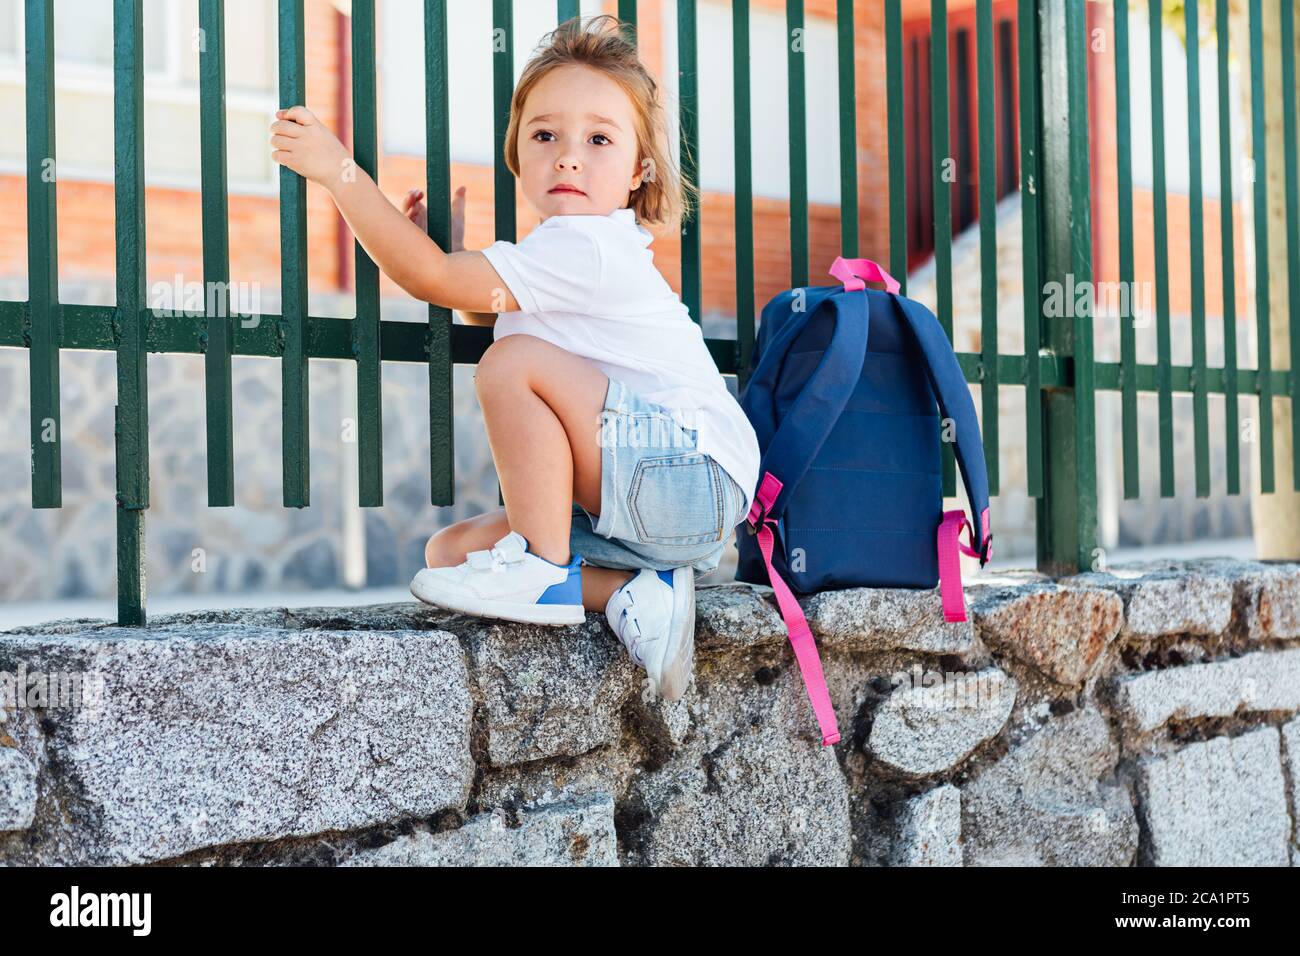 A blond-haired girl carrying a blue backpack on the school fence. School concept Stock Photo